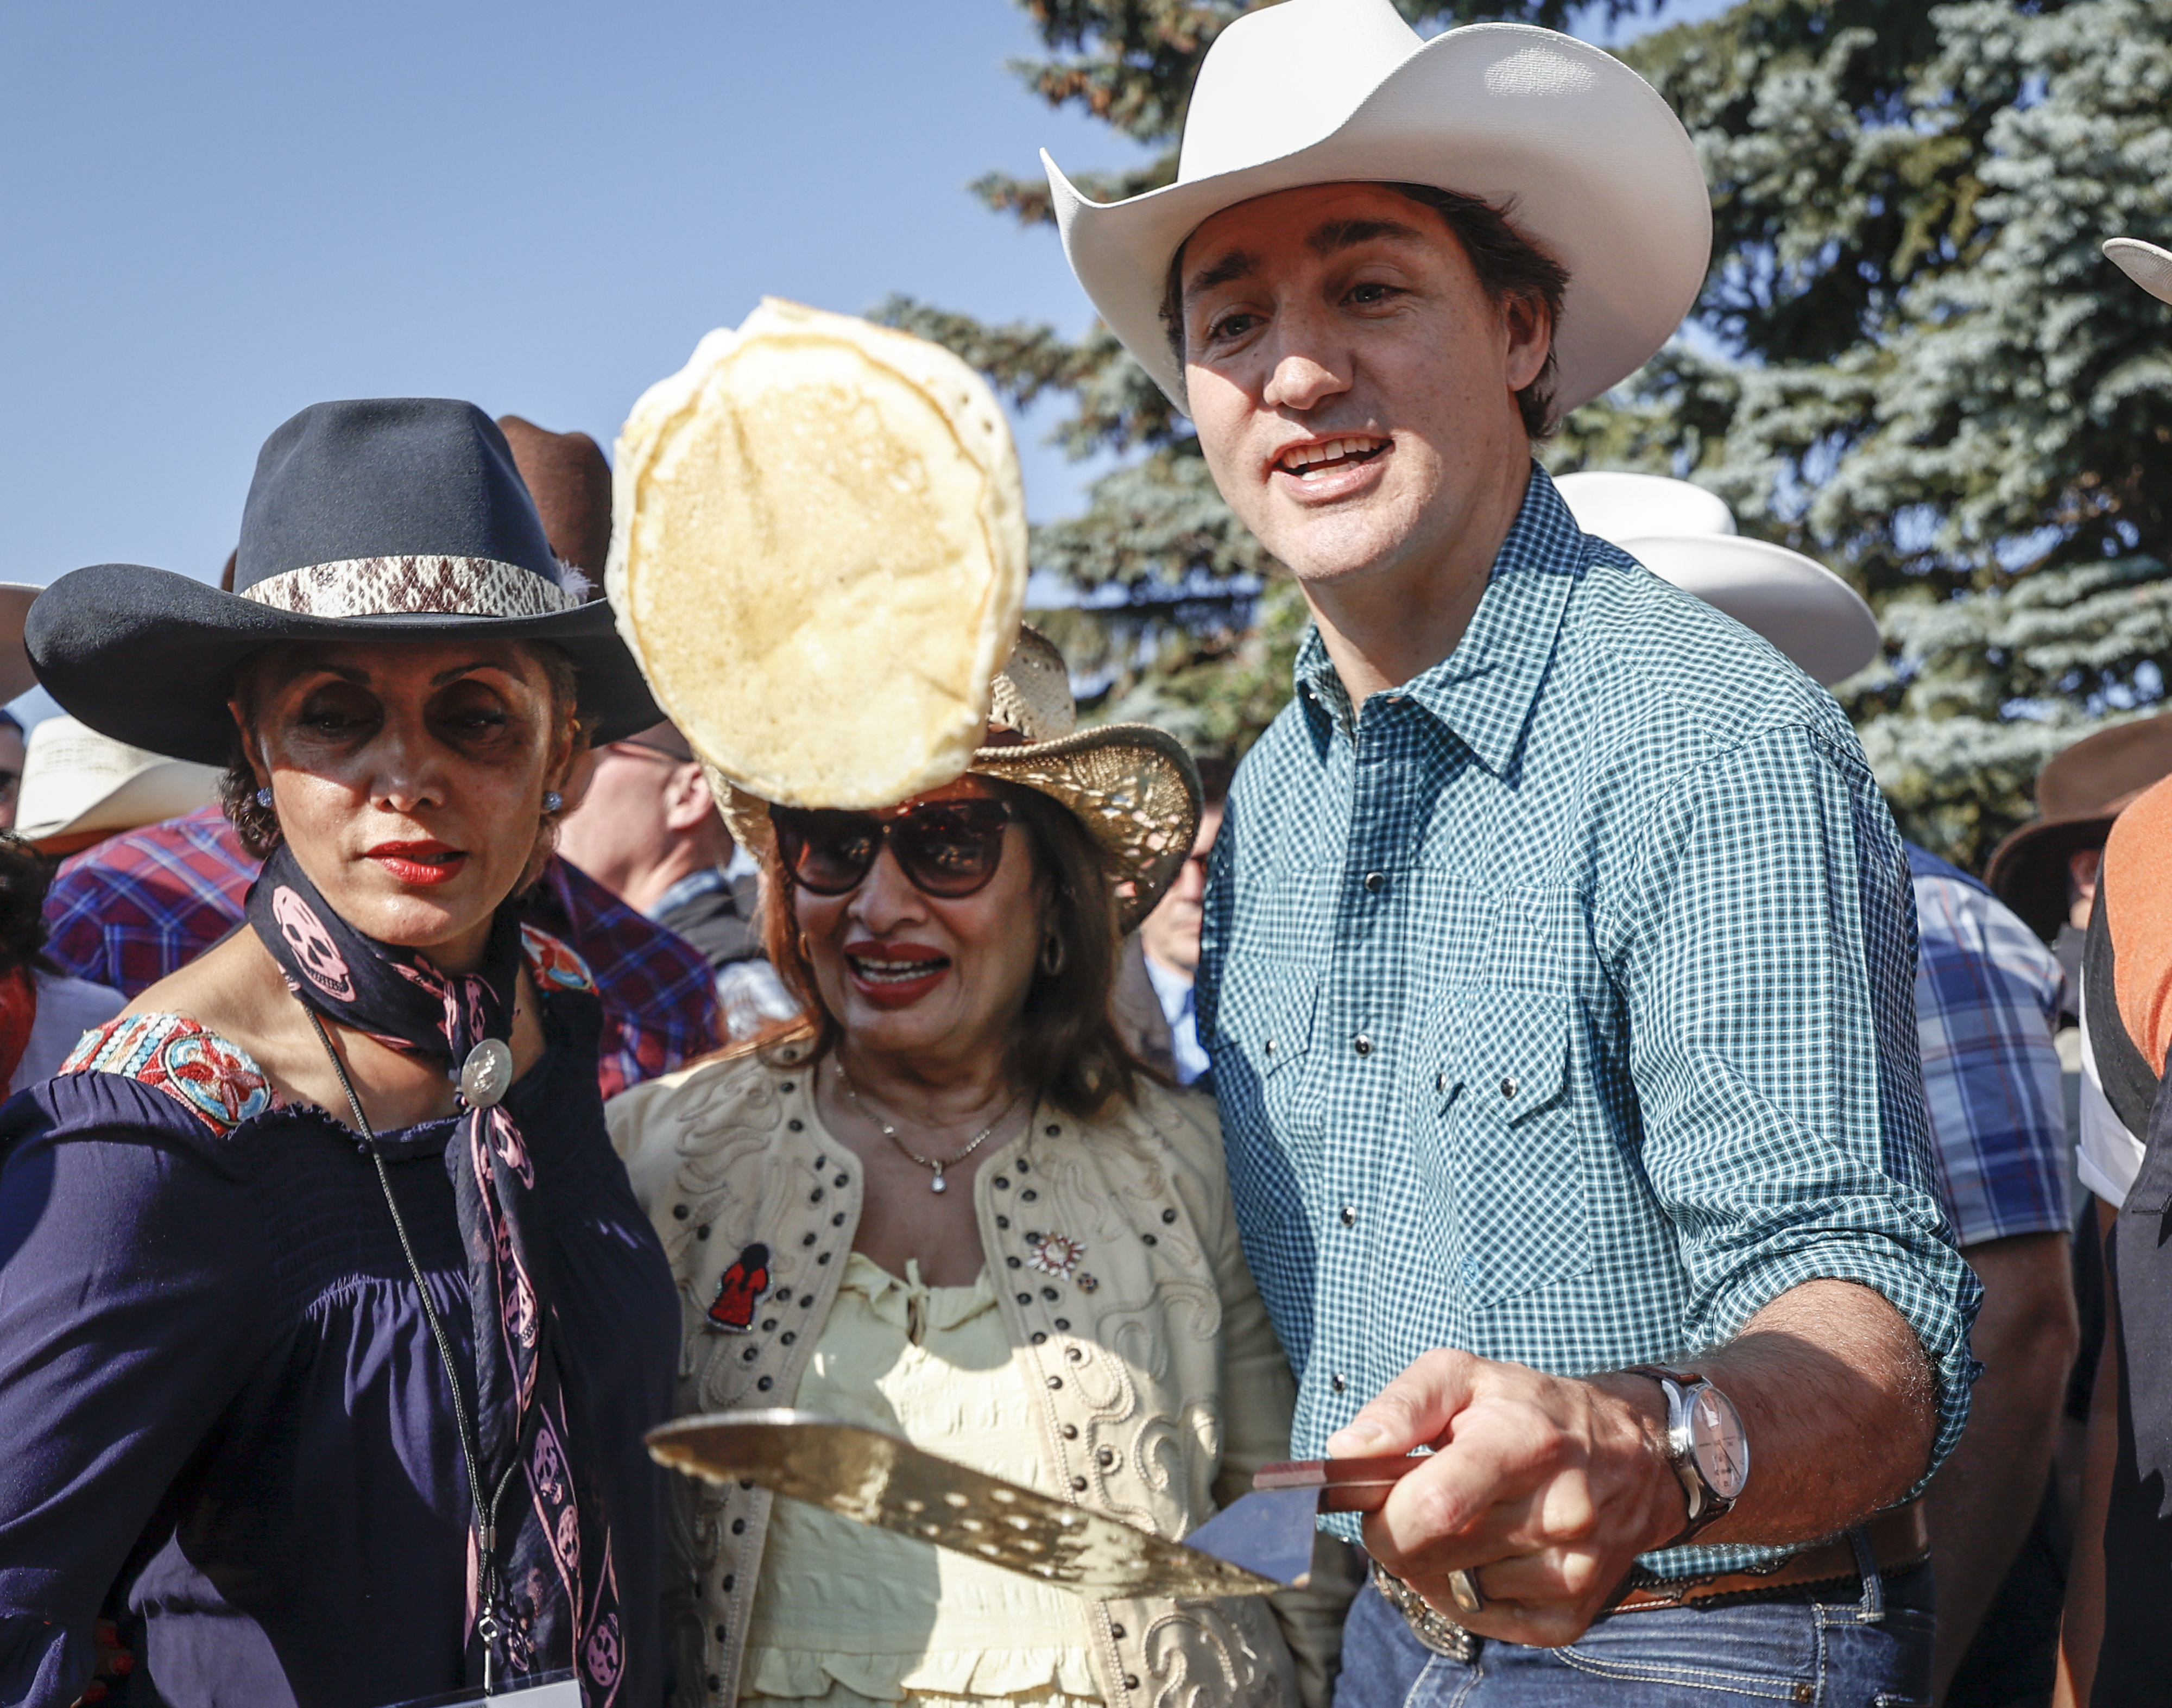 Justin Trudeau to miss this year’s Calgary Stampede, his office says